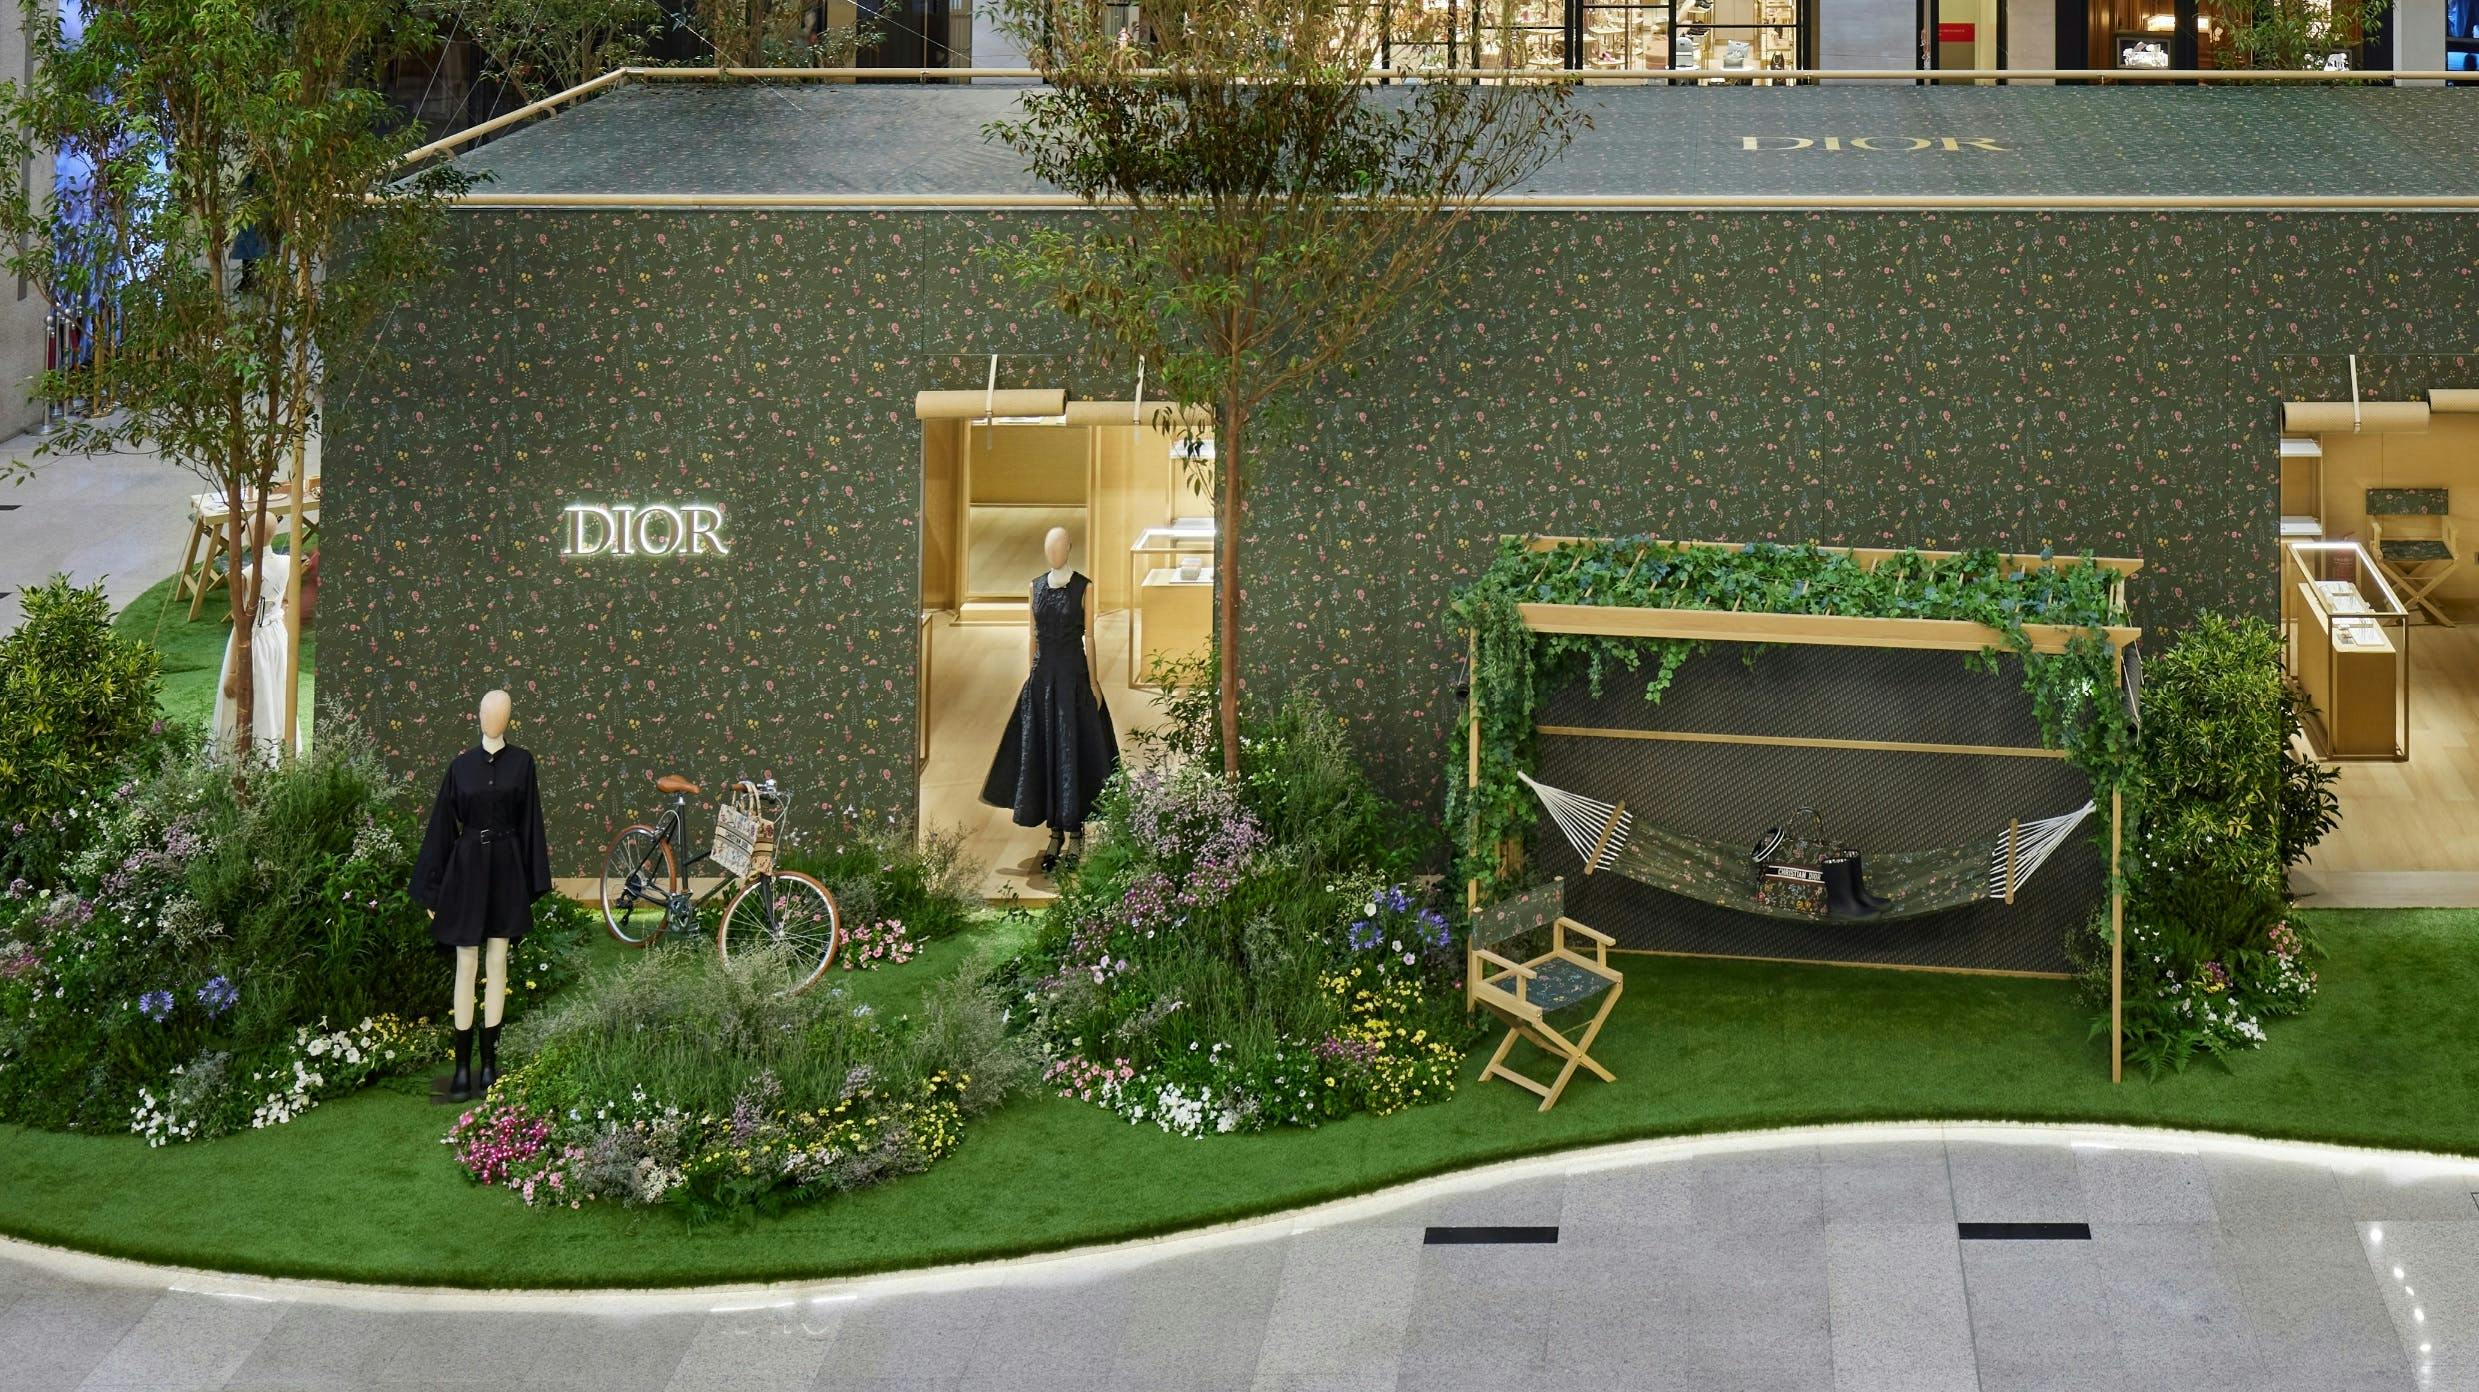 Dior Malaysia welcomes you to the Dior Garden in Pavilion KL